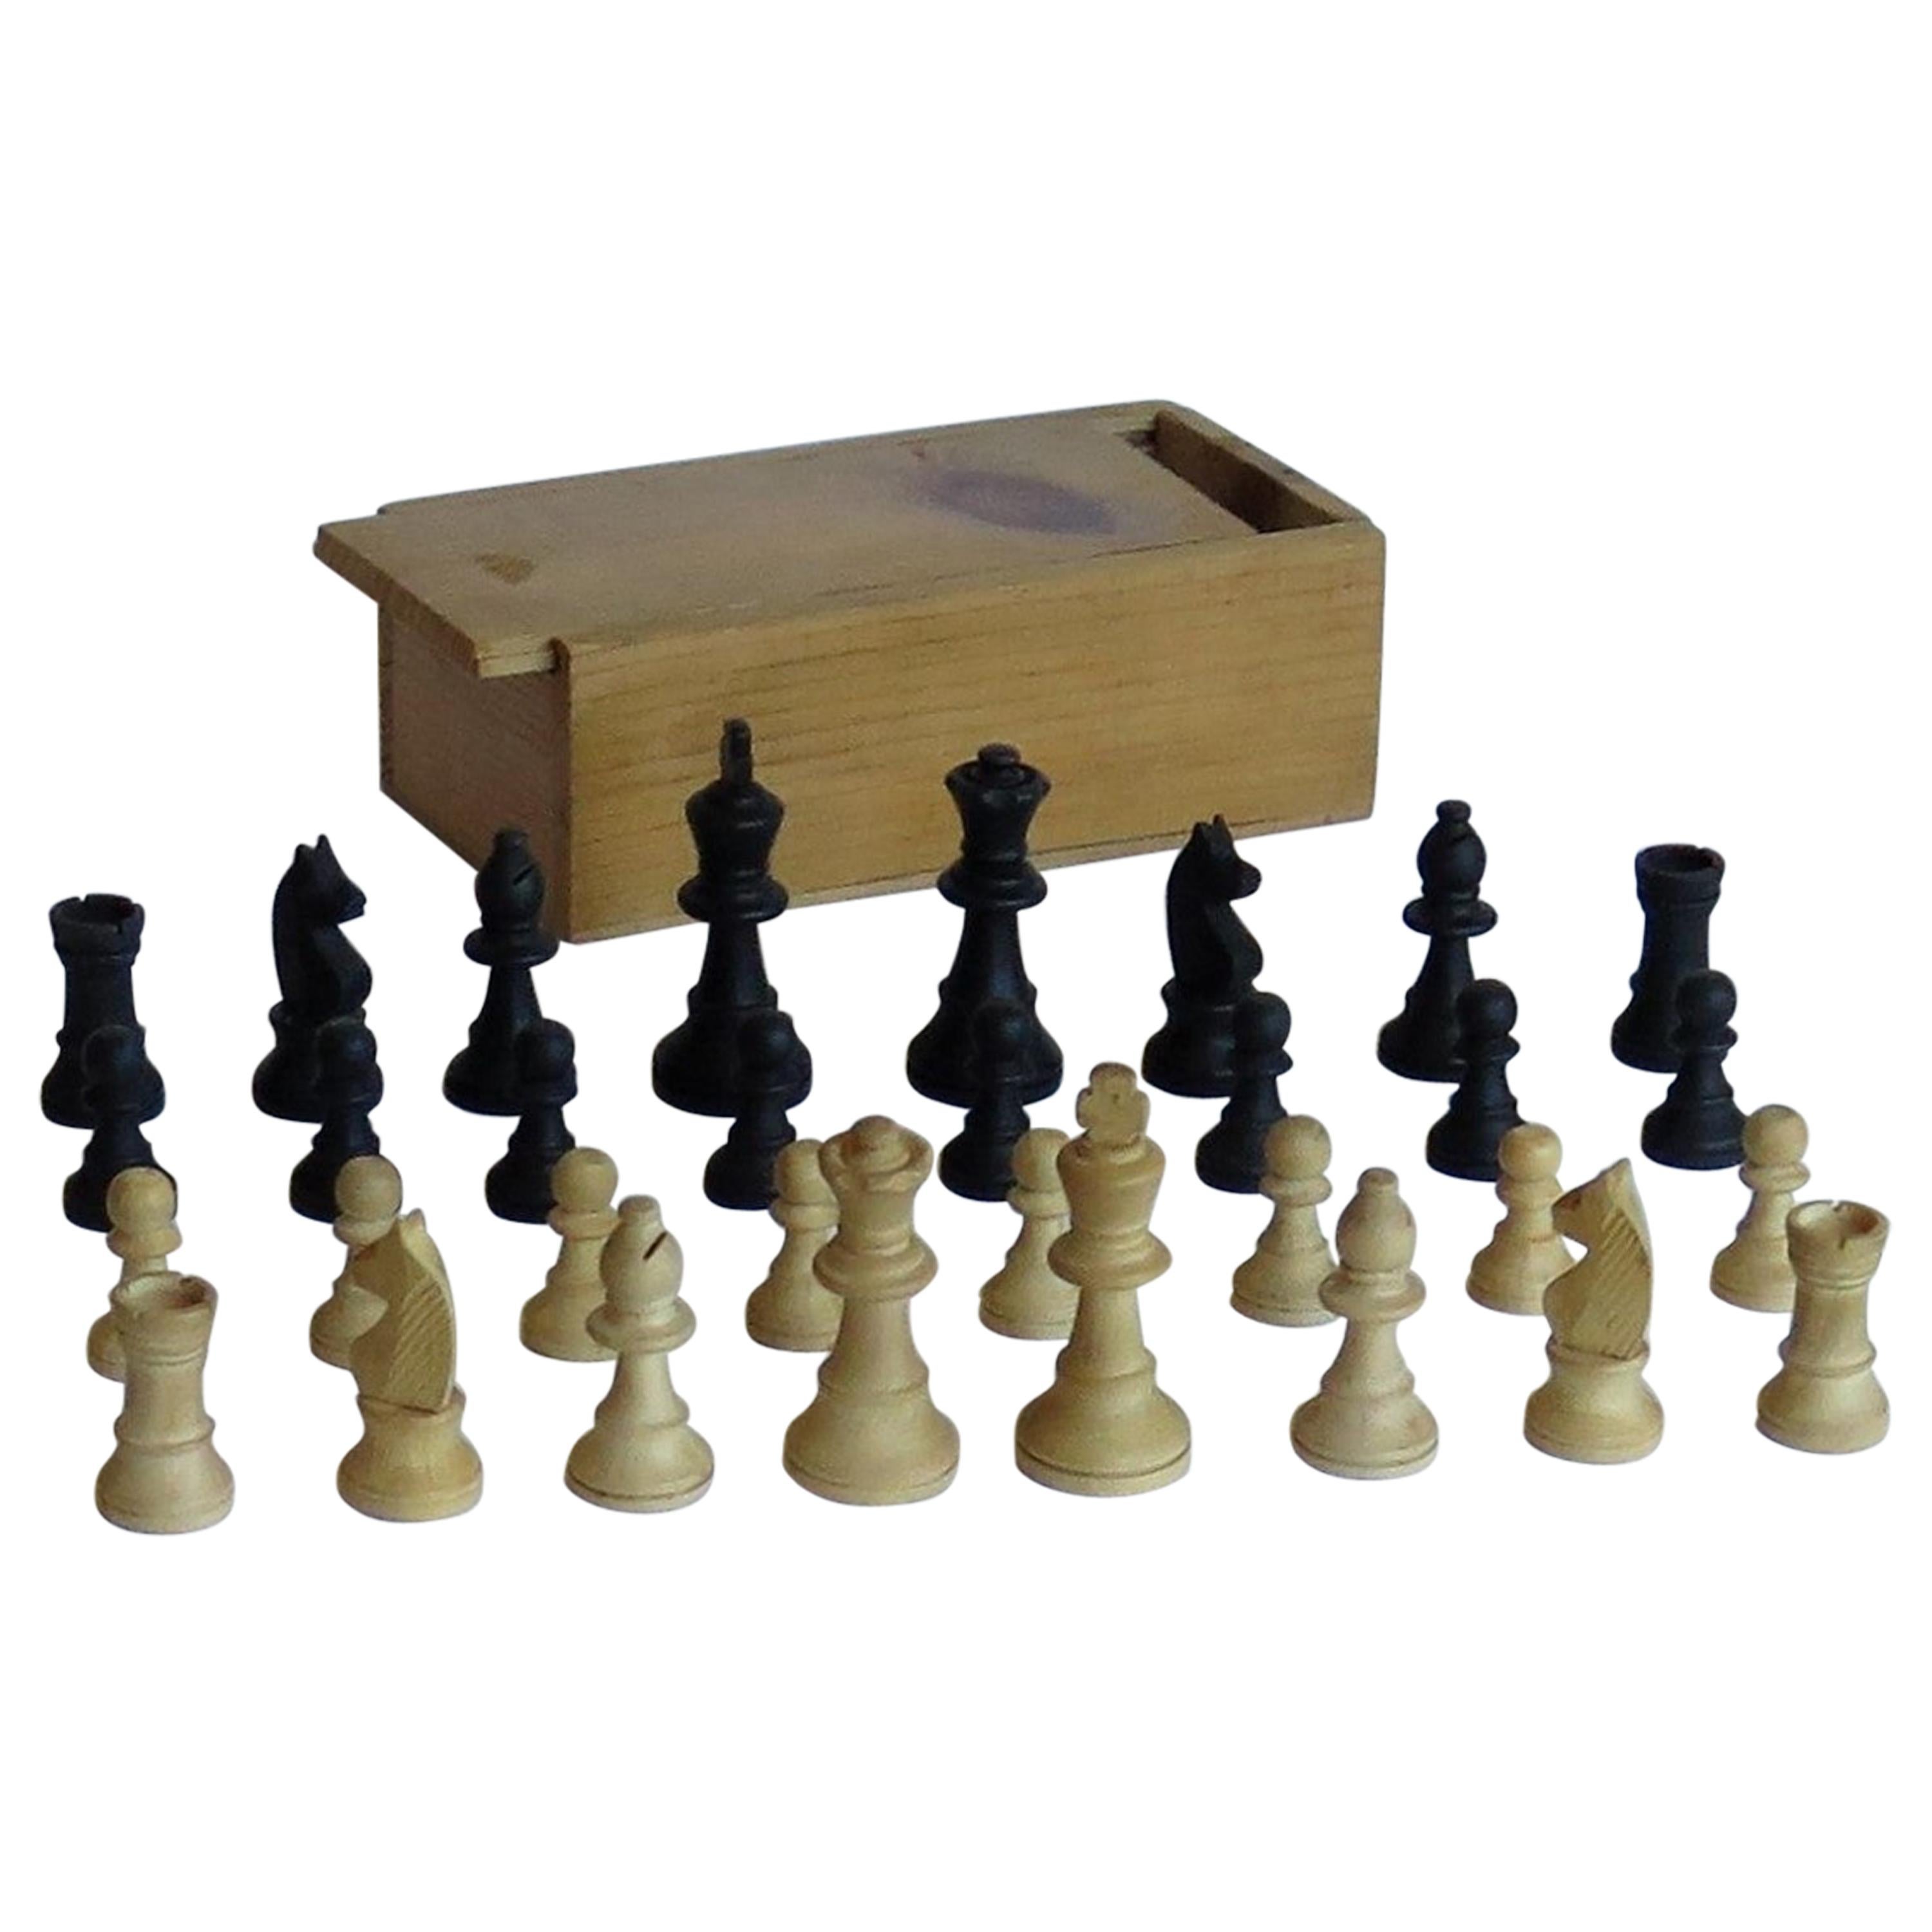 Handmade Wood Complete Chess Set Game in Pine Lidded Box, circa 1930